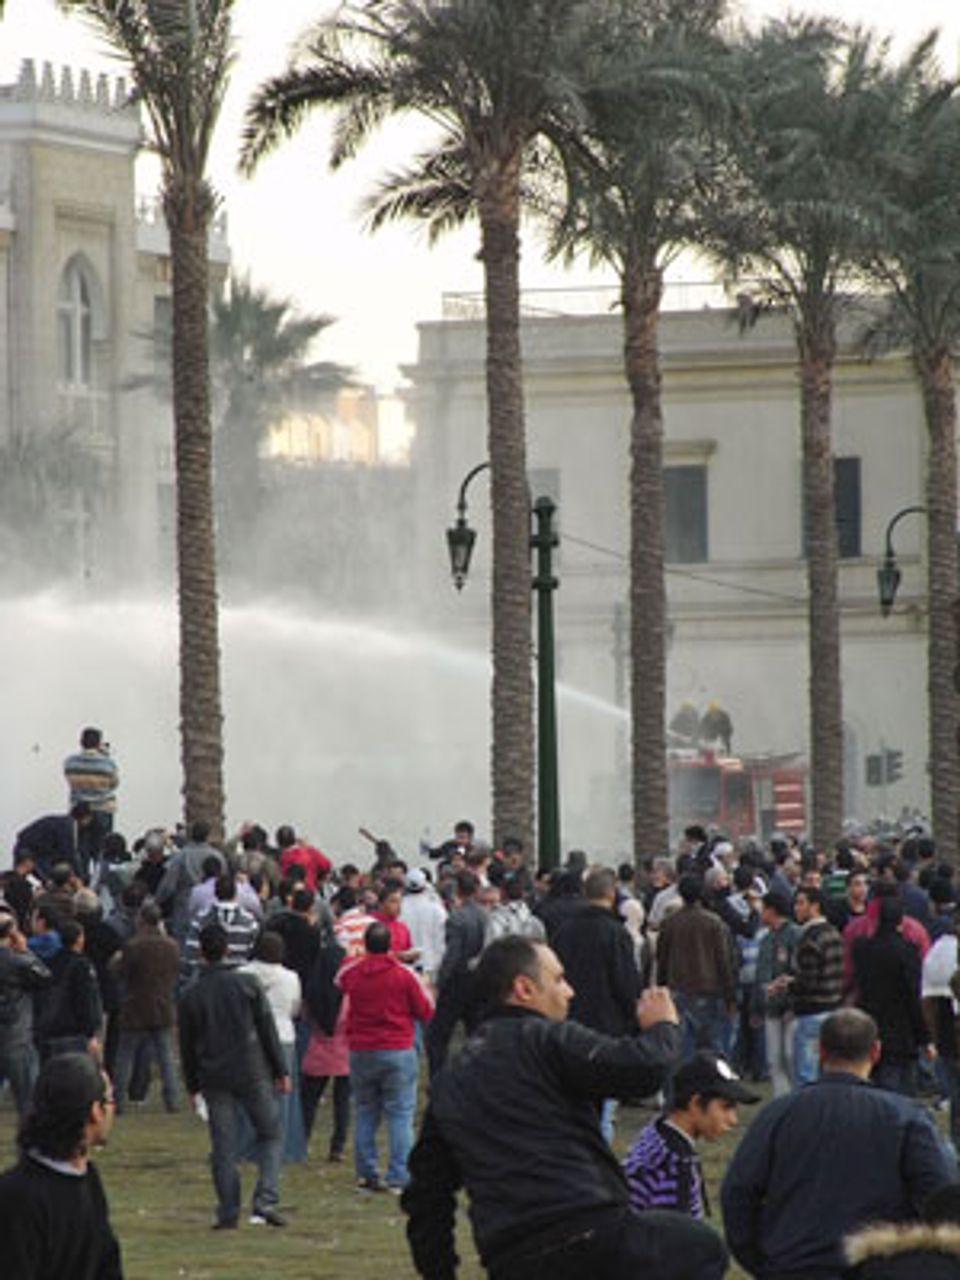 Water cannons